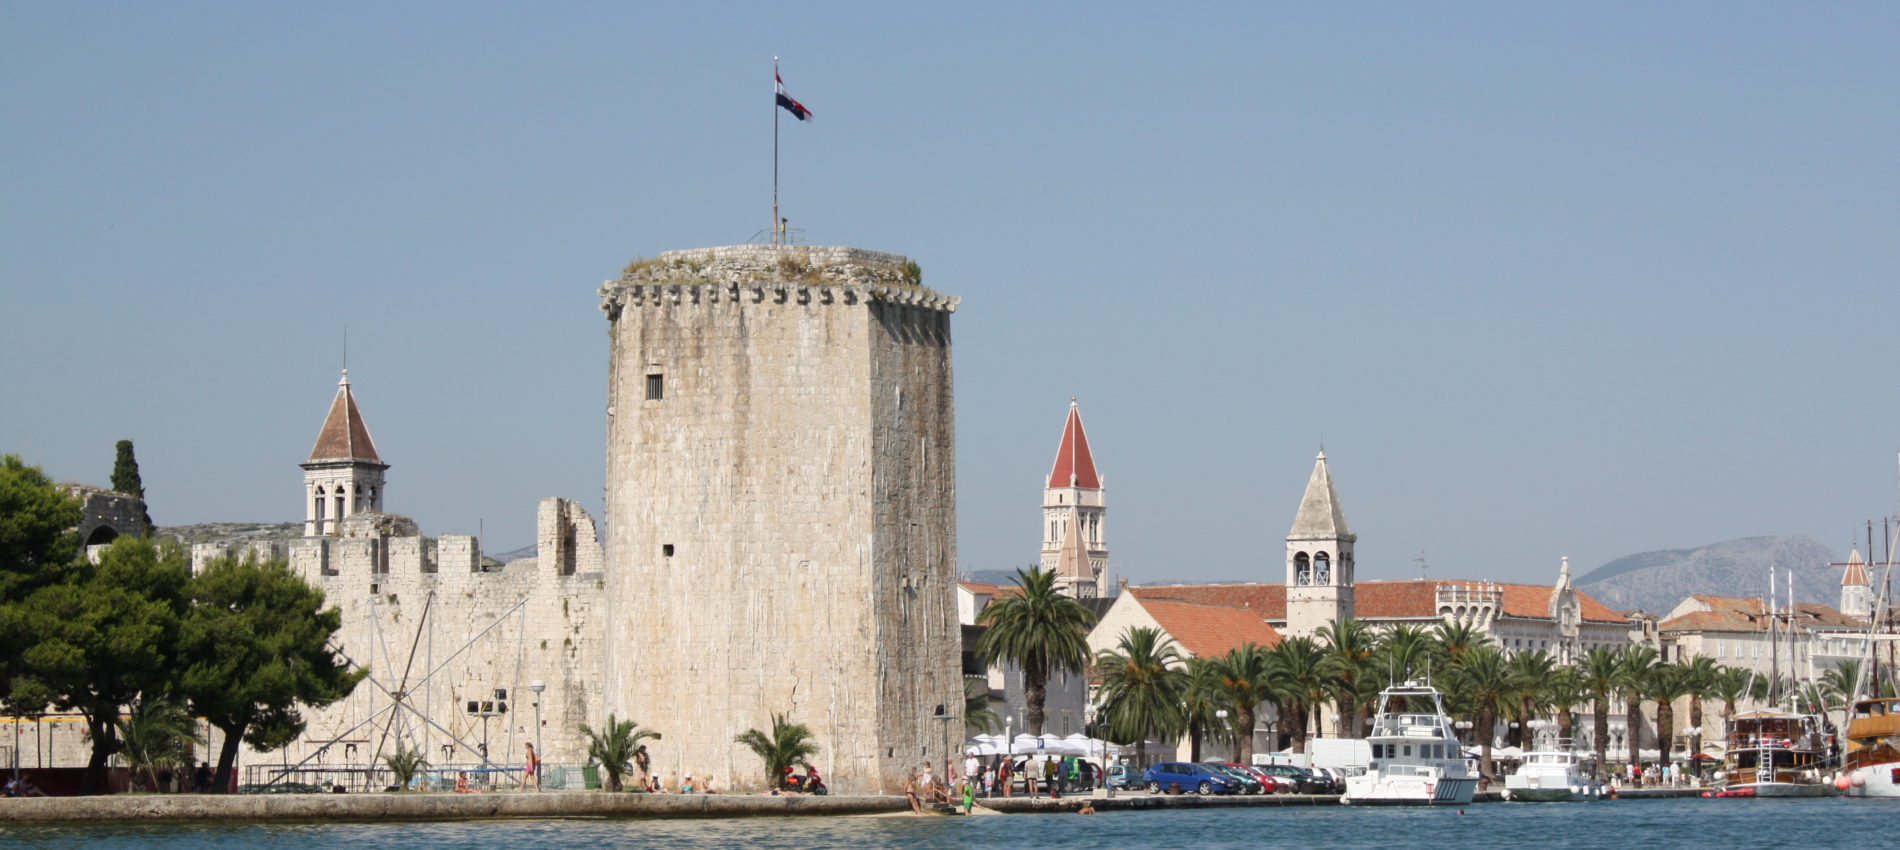 Nautical Story about Trogir